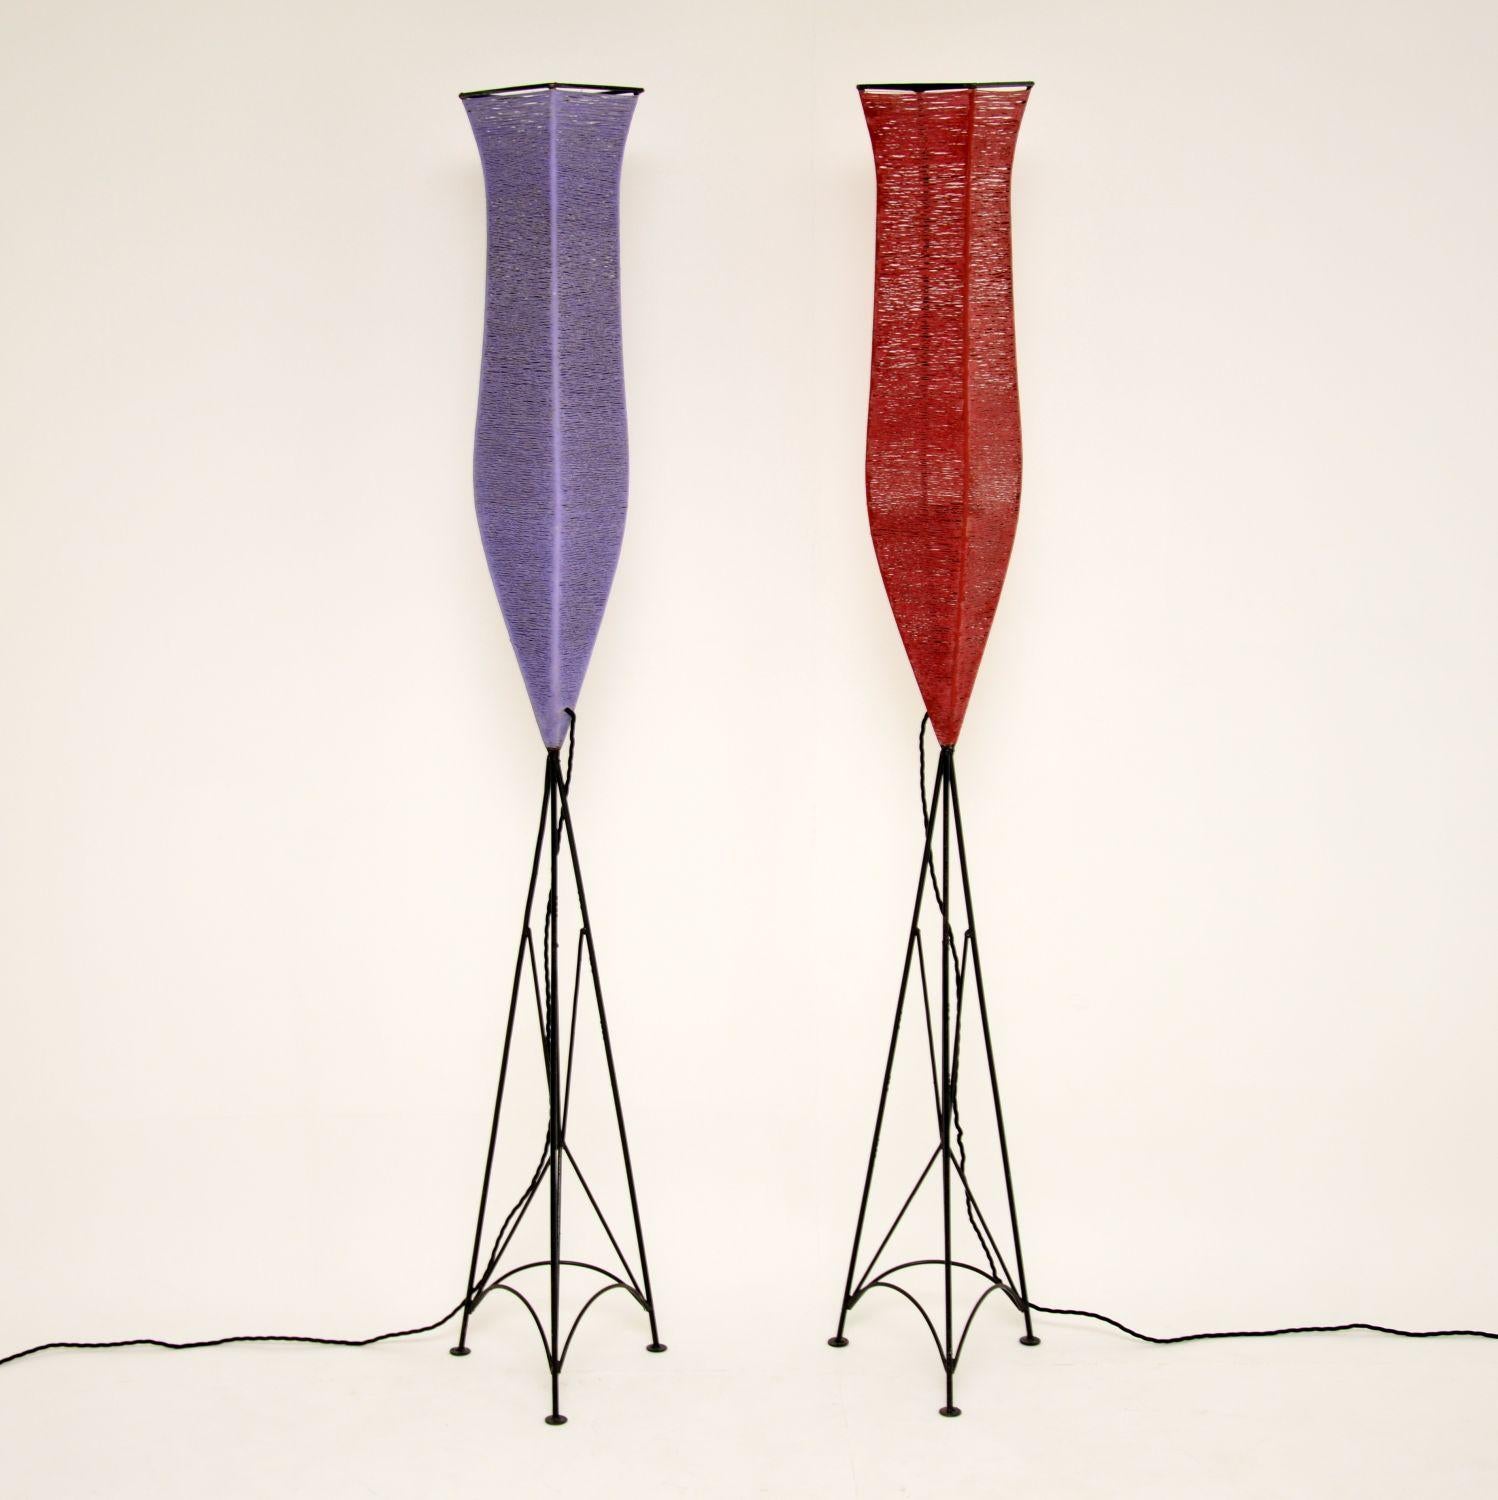 This is a very unusual and stylish pair of vintage floor lamps, dating from circa 1960s. They are made with black painted steel frames, and shades that have been spun from a tough and colorful material. The result is very striking and beautiful.